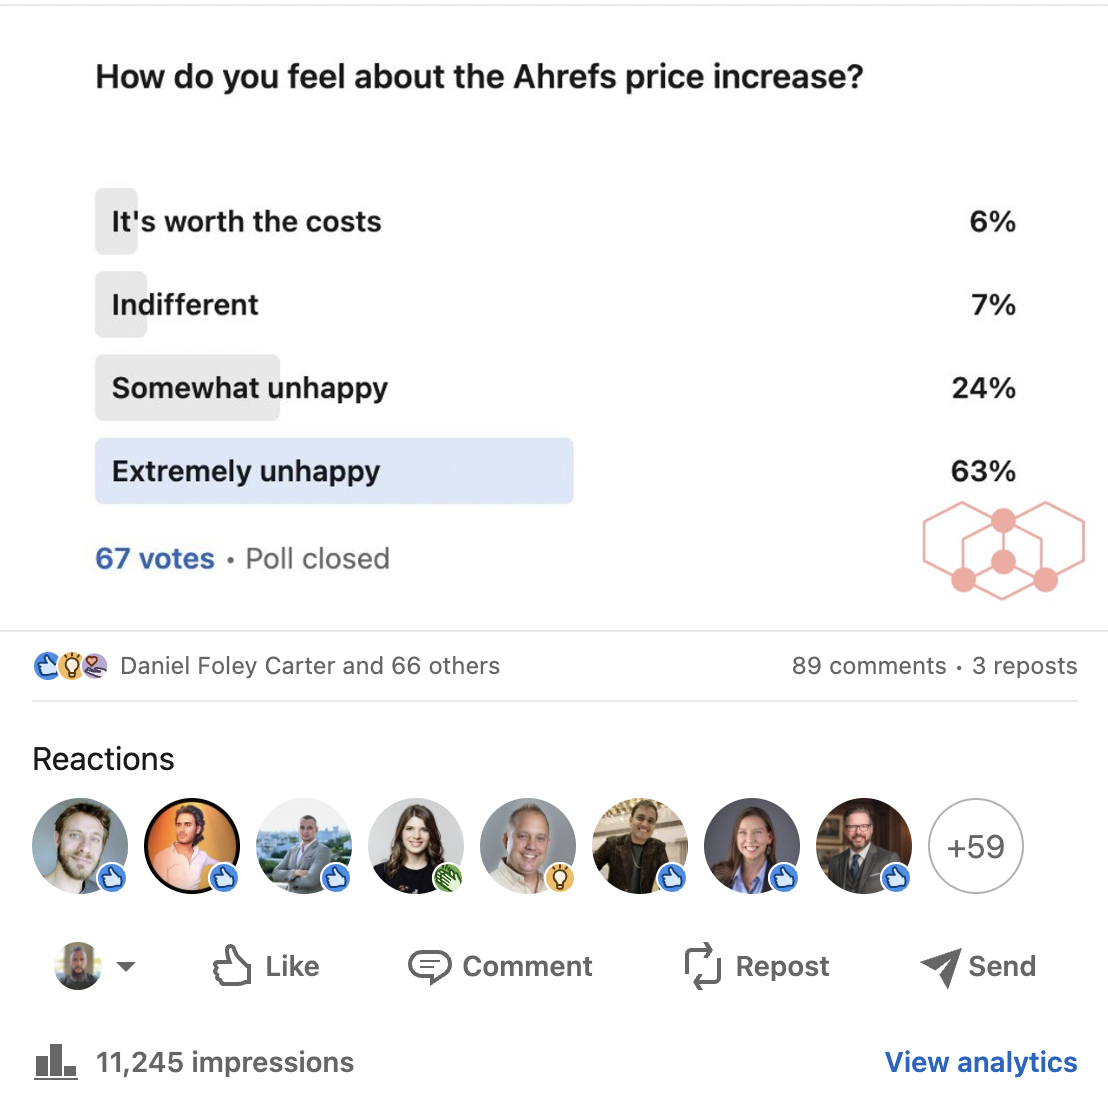 LinkedIn survey example for data campaign